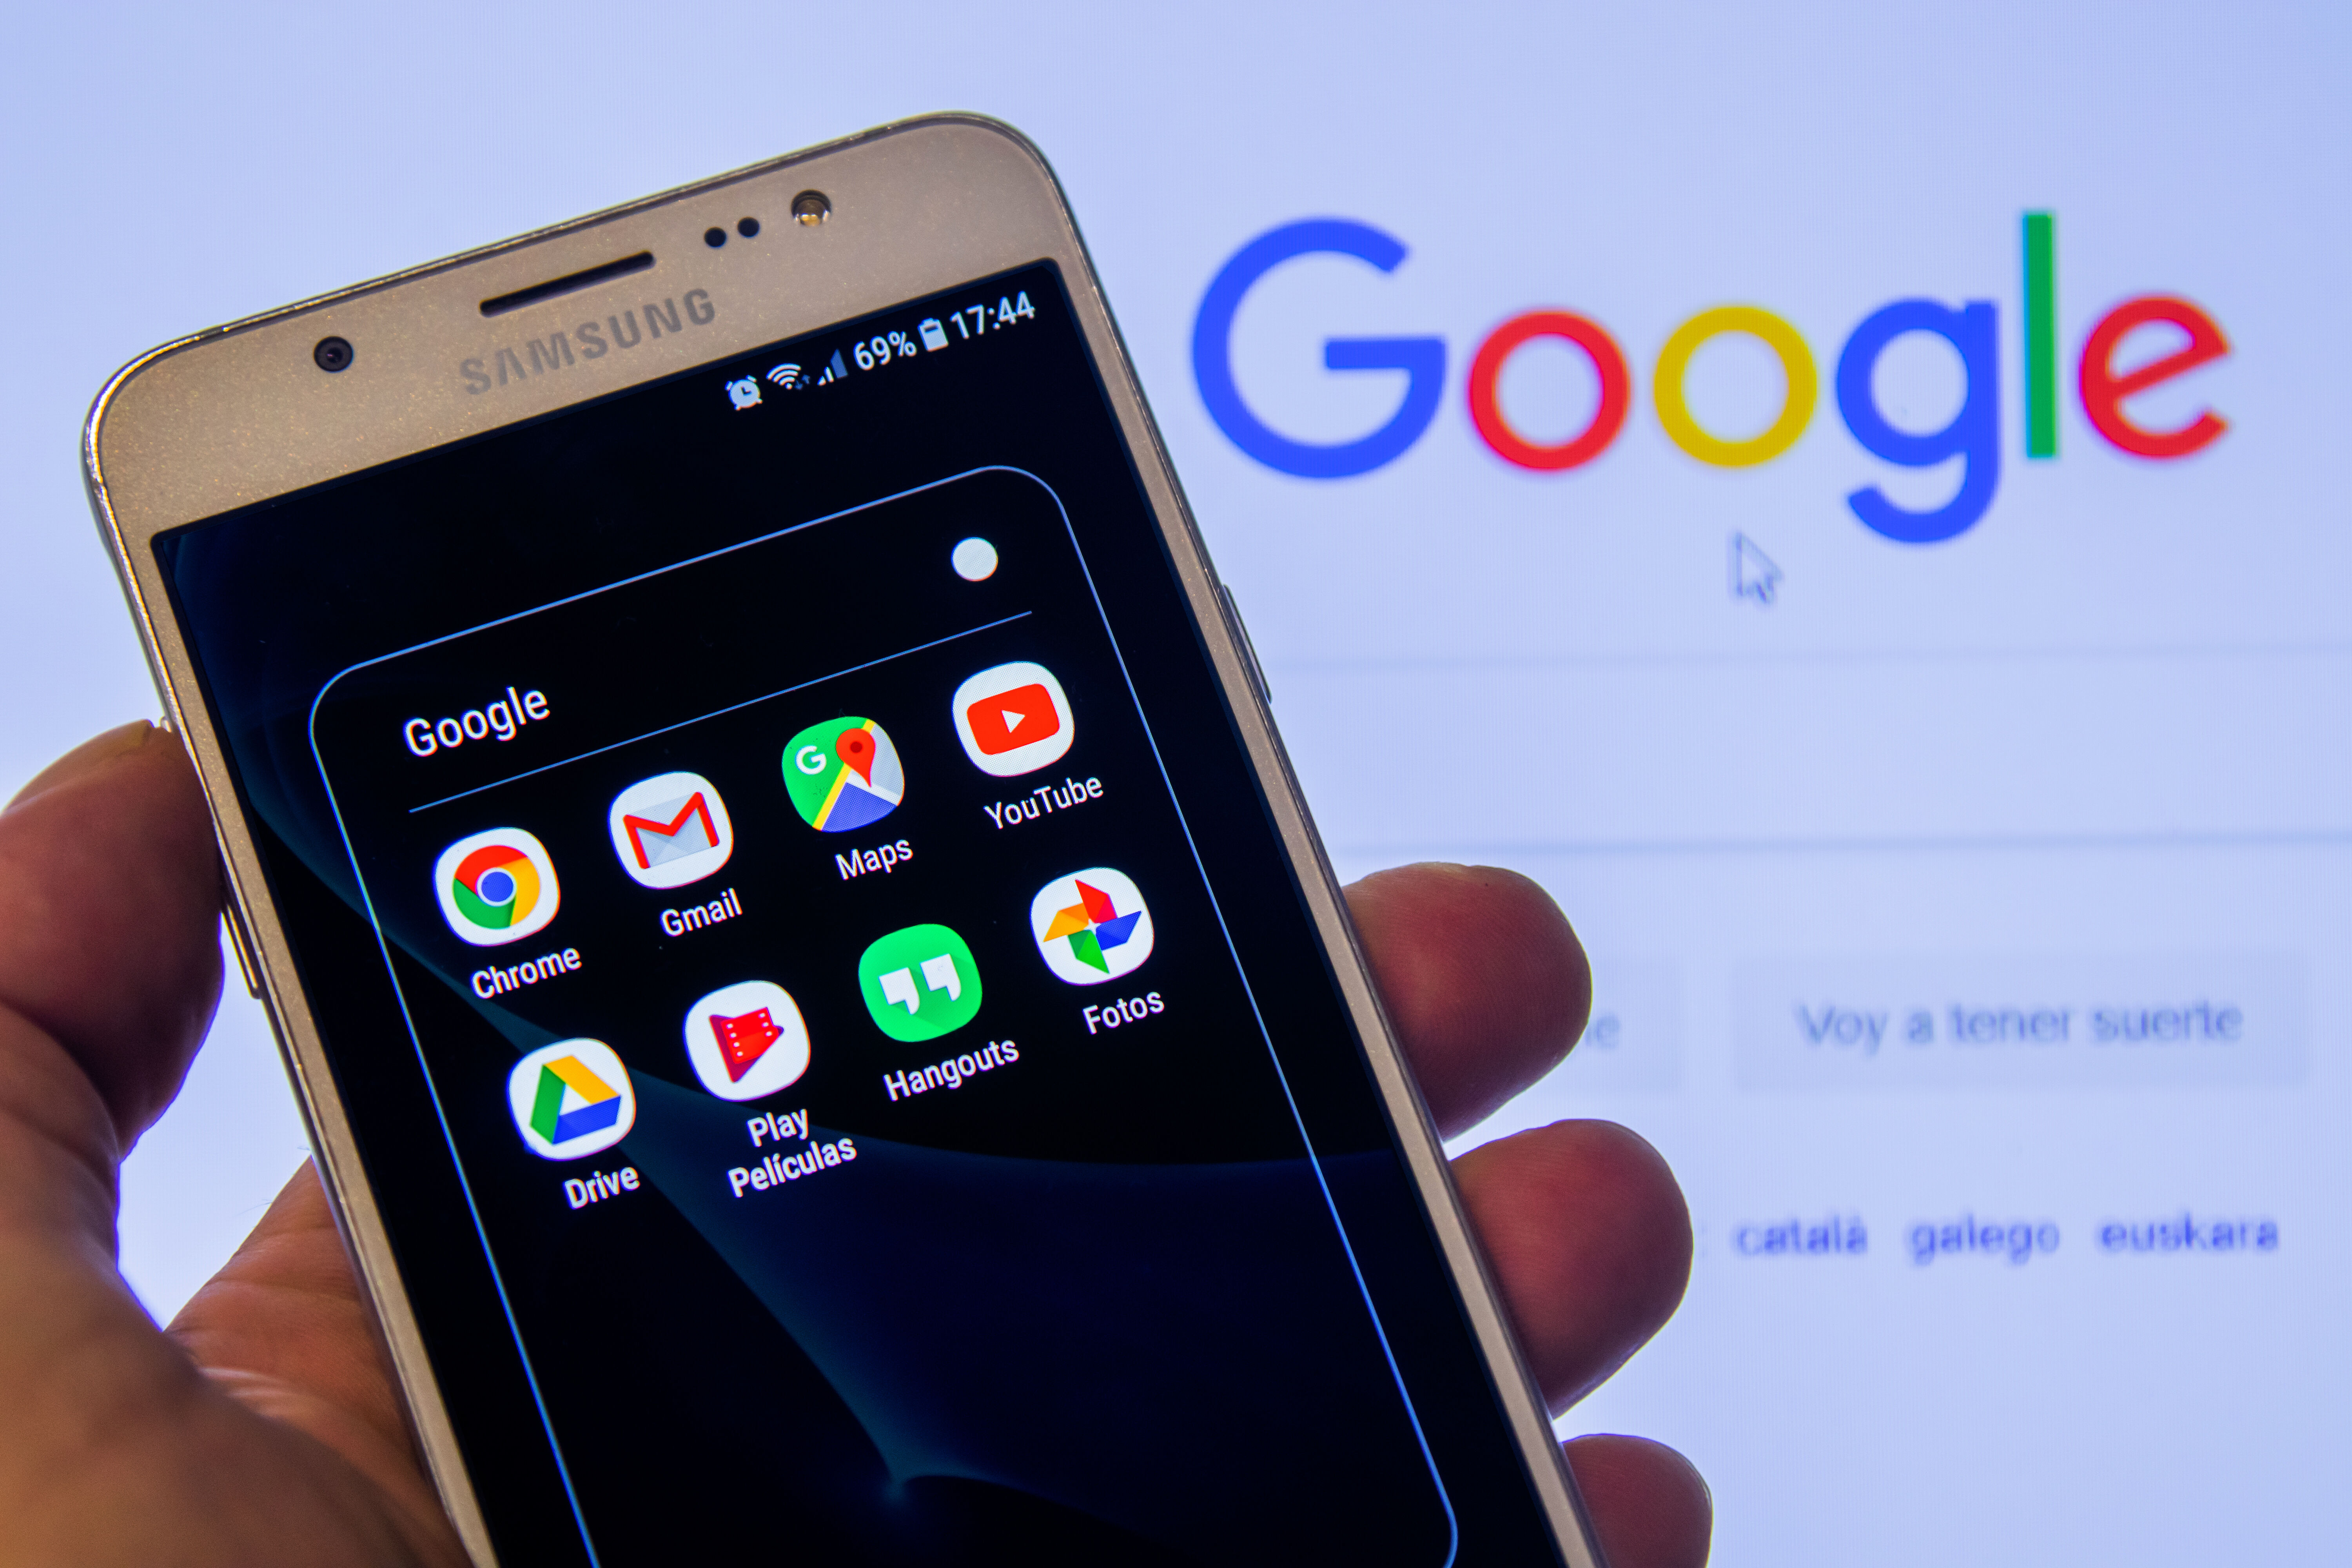 google knows everything about you hand holding a samsung smart phone with the google apps icons on the phone's screen, with a google search homepage in the background